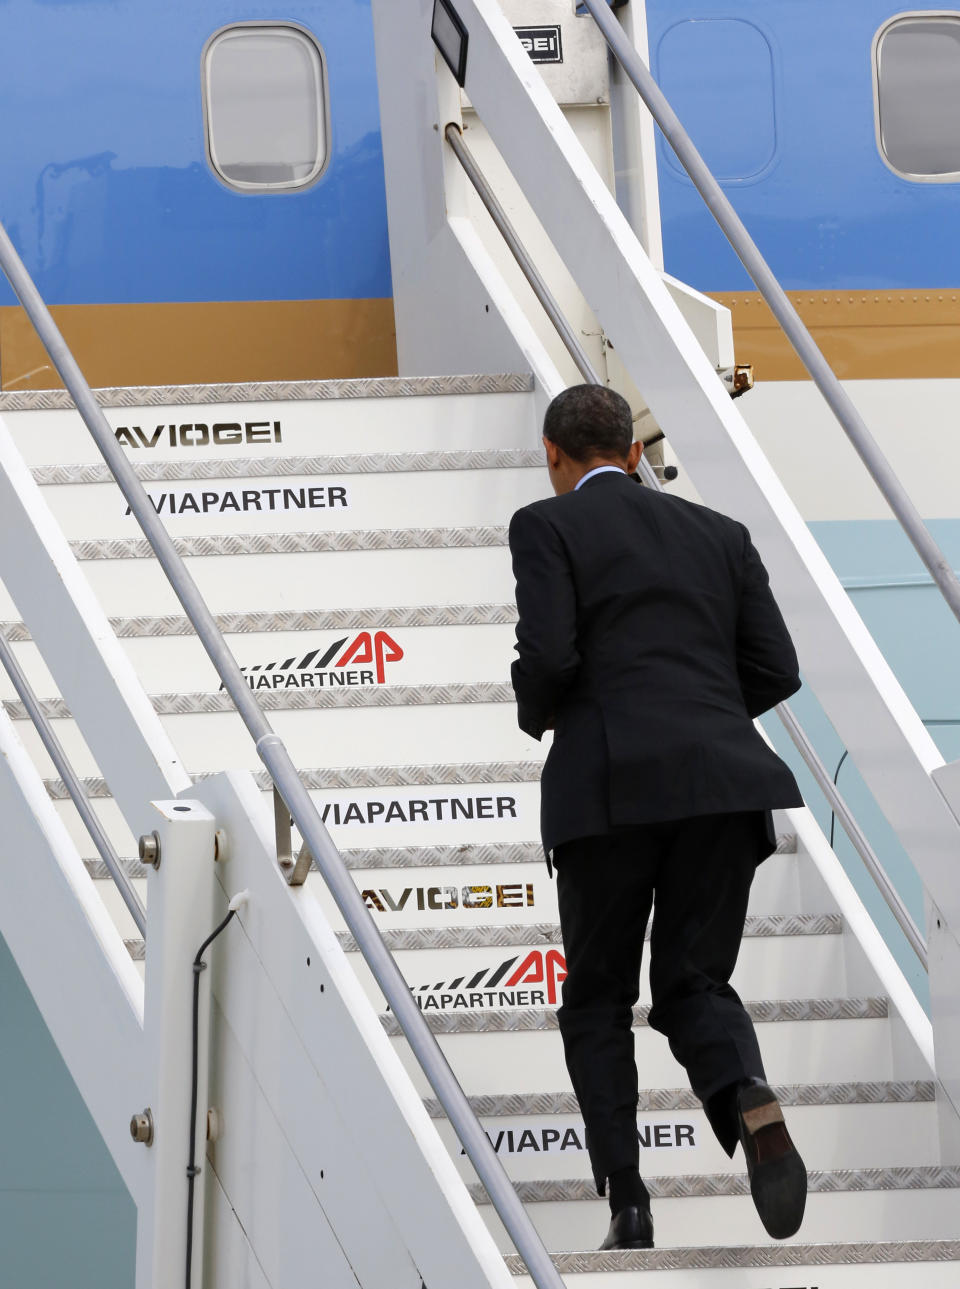 US President Barack Obama waves on his departure on Air Force One at Fiumicino Airport, Friday, March 28, 2014 in Rome. Obama departs Italy for Saudi Arabia, to meet with King Abdullah, the final stop on a weeklong overseas trip. (AP Photo/Riccardo De Luca)